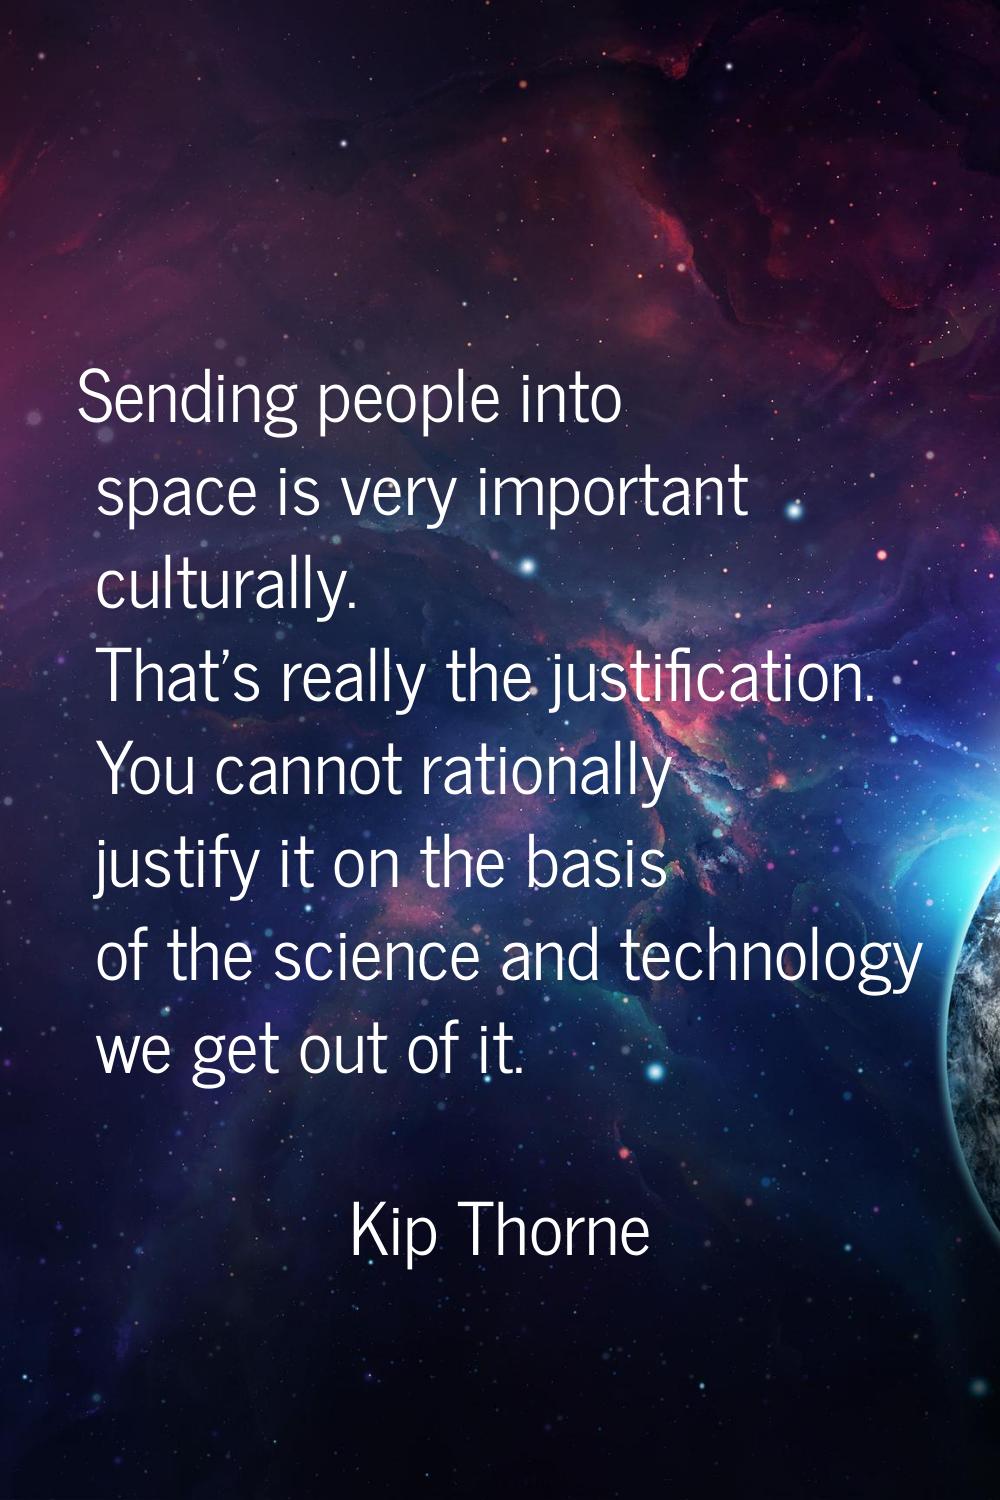 Sending people into space is very important culturally. That's really the justification. You cannot